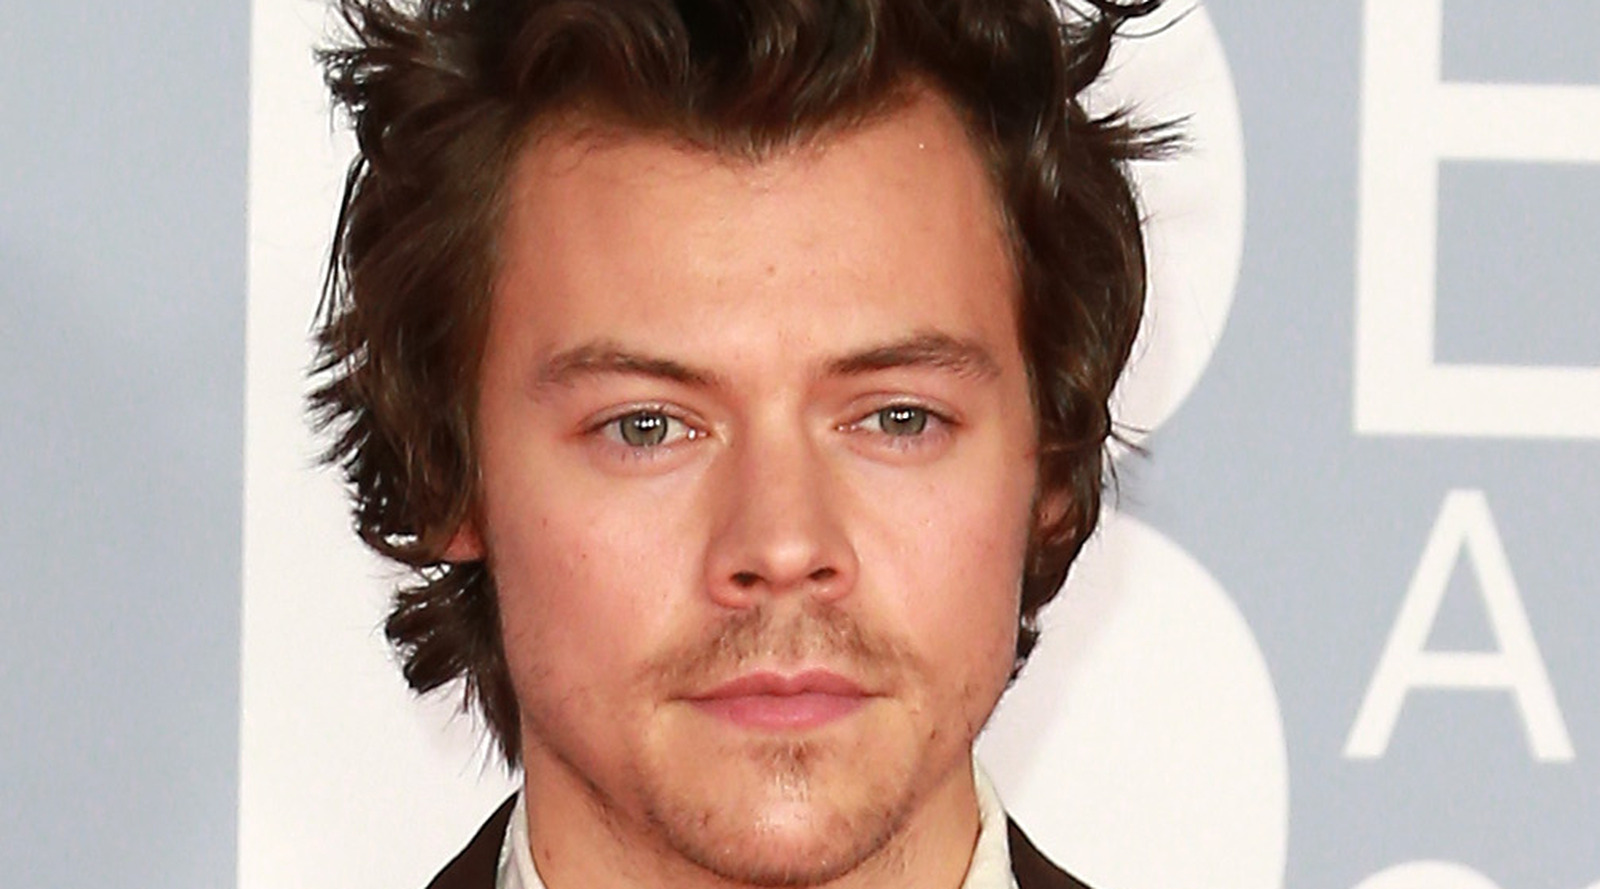 Harry Styles Confirms He Has Four Nipples, a Condition Called